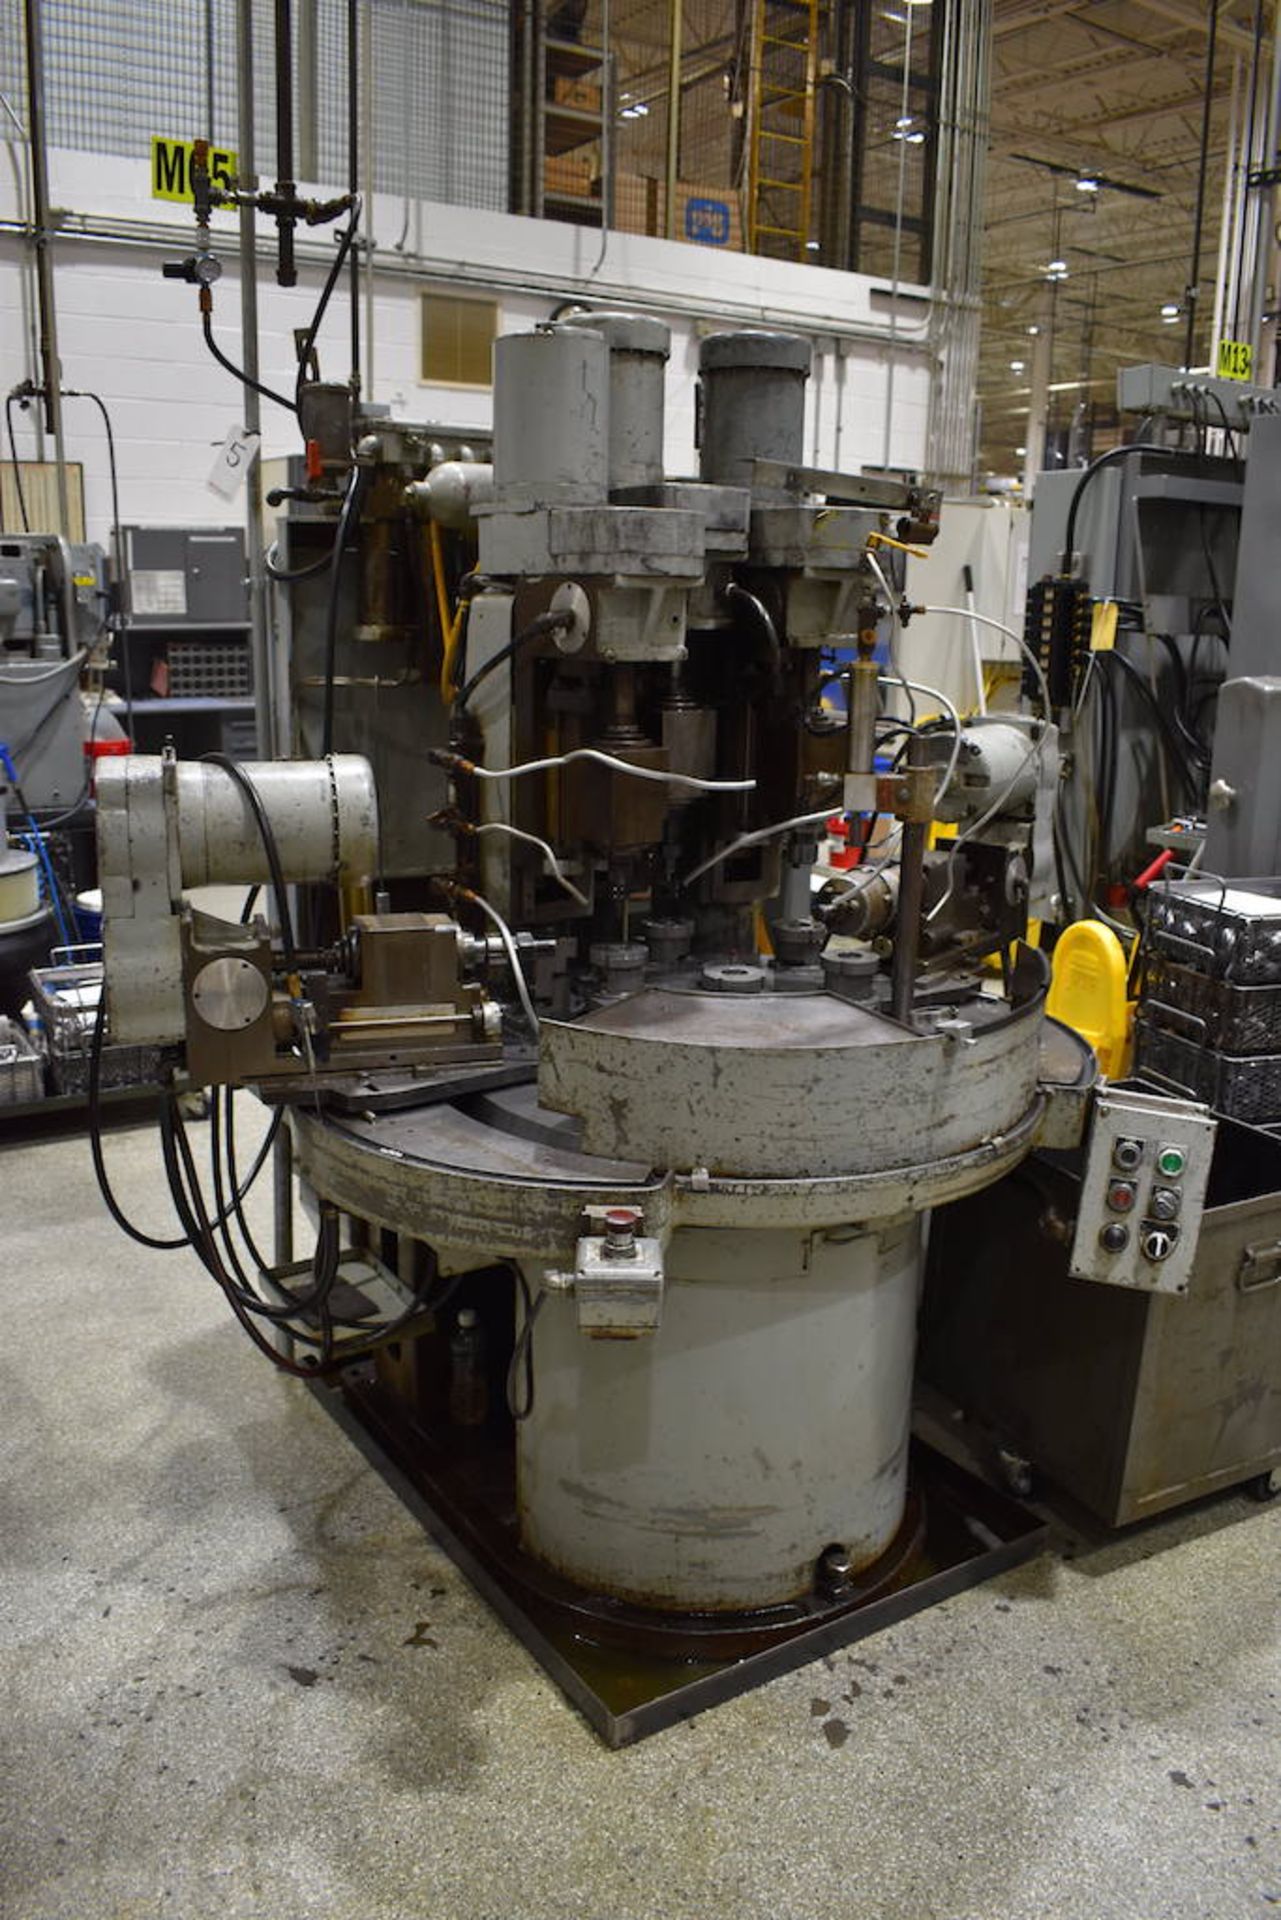 MSO MODEL 10-902 5-SPINDLE SECONDARY DRILLING MACHINE: S/N 67-11-294 (Hanover Park)